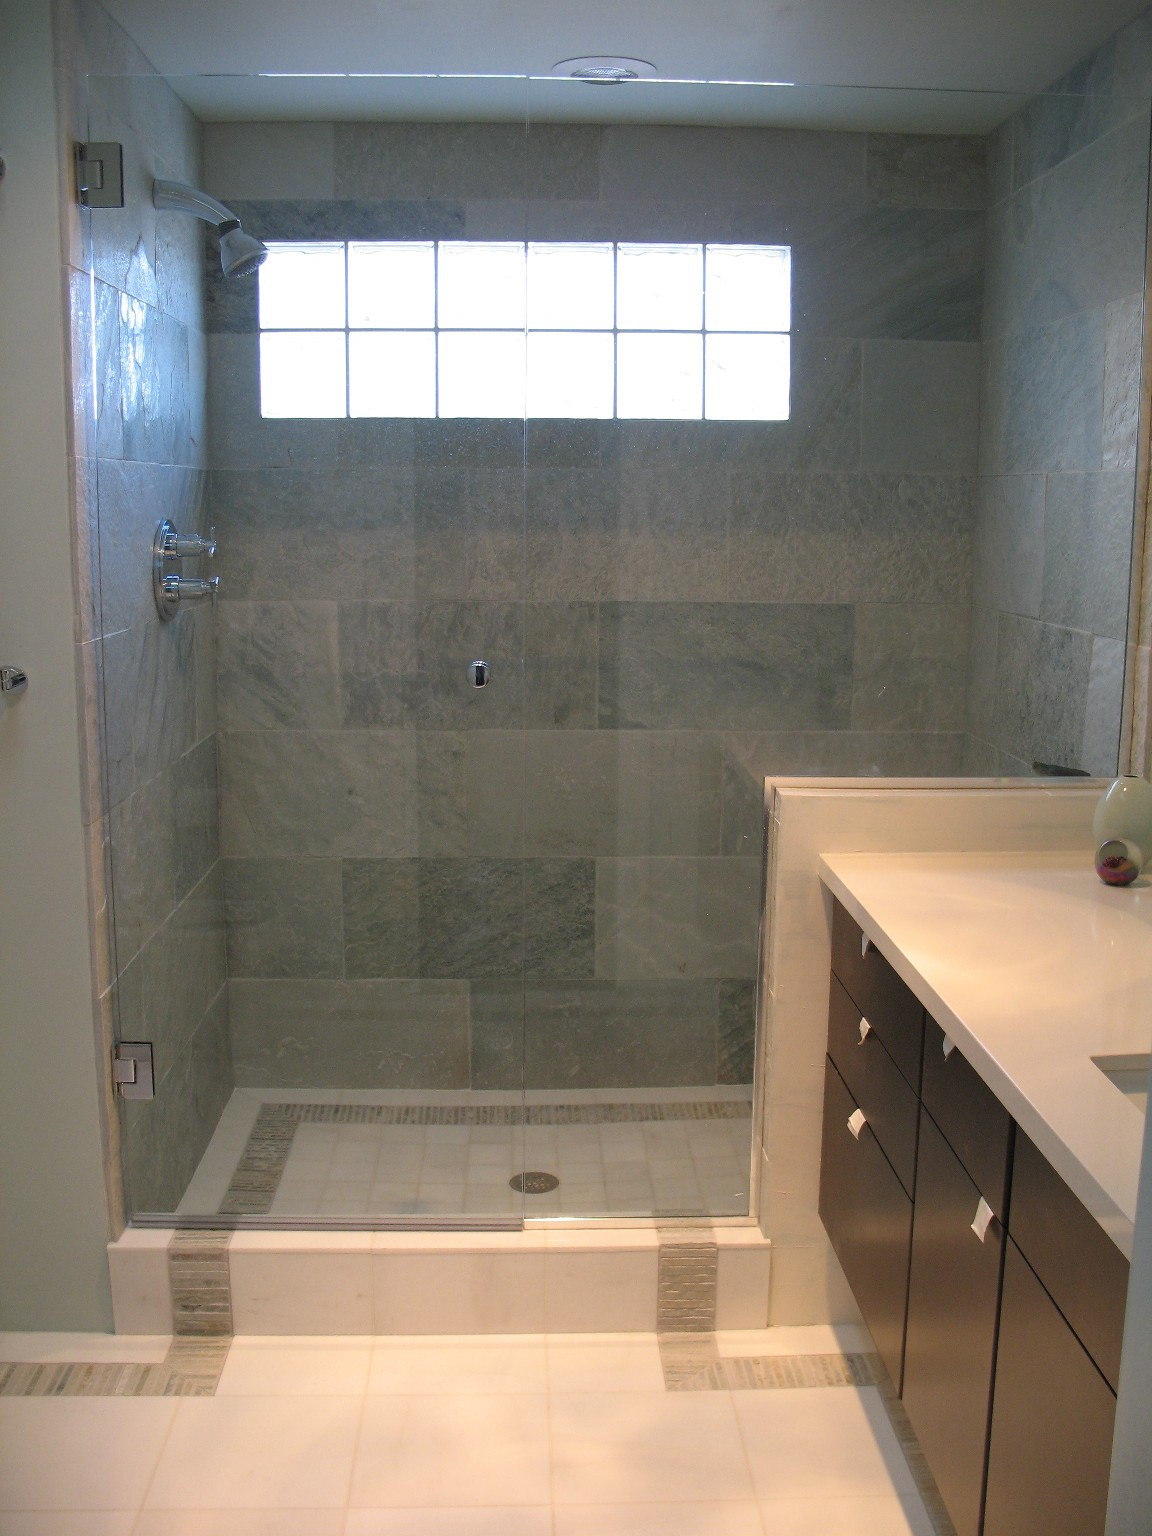 Bathroom Shower Floor Tile Ideas
 33 amazing ideas and pictures of modern bathroom shower